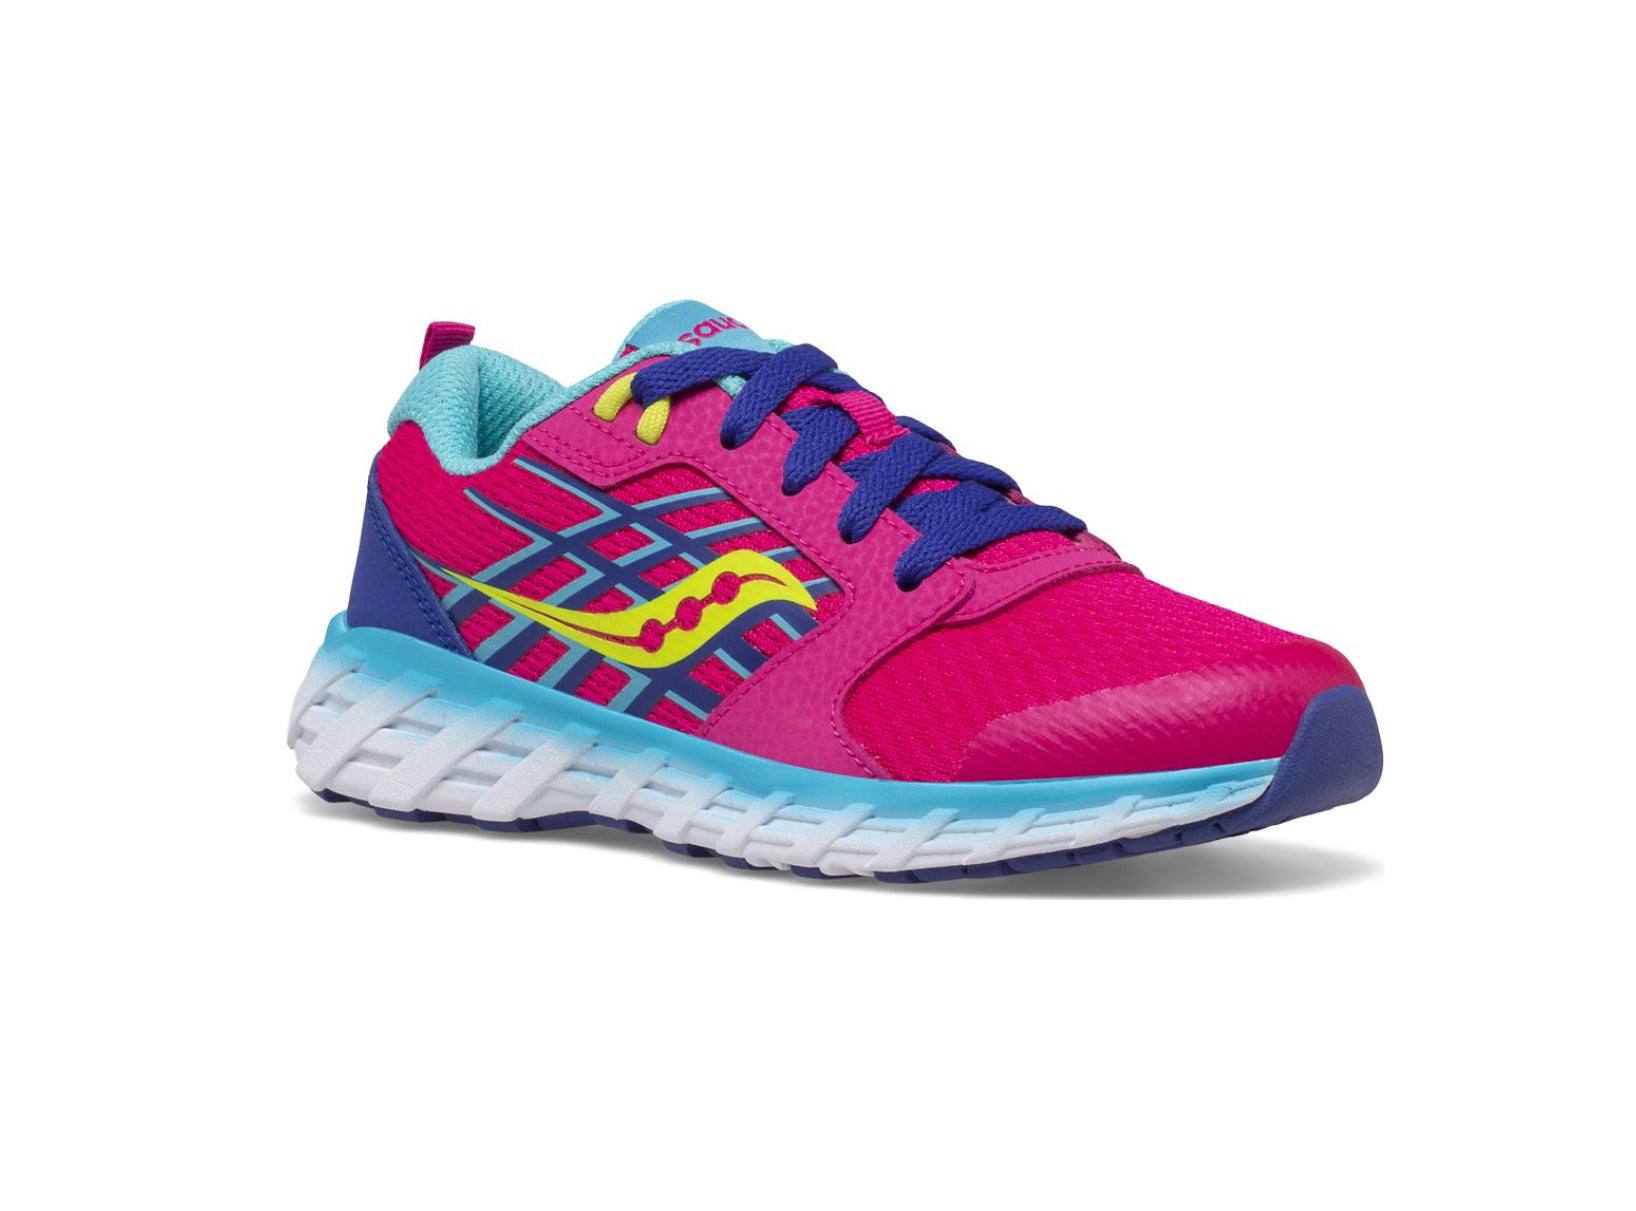 Girl’s Wind 2.0 Sneakers - The Shoe CollectiveSaucony